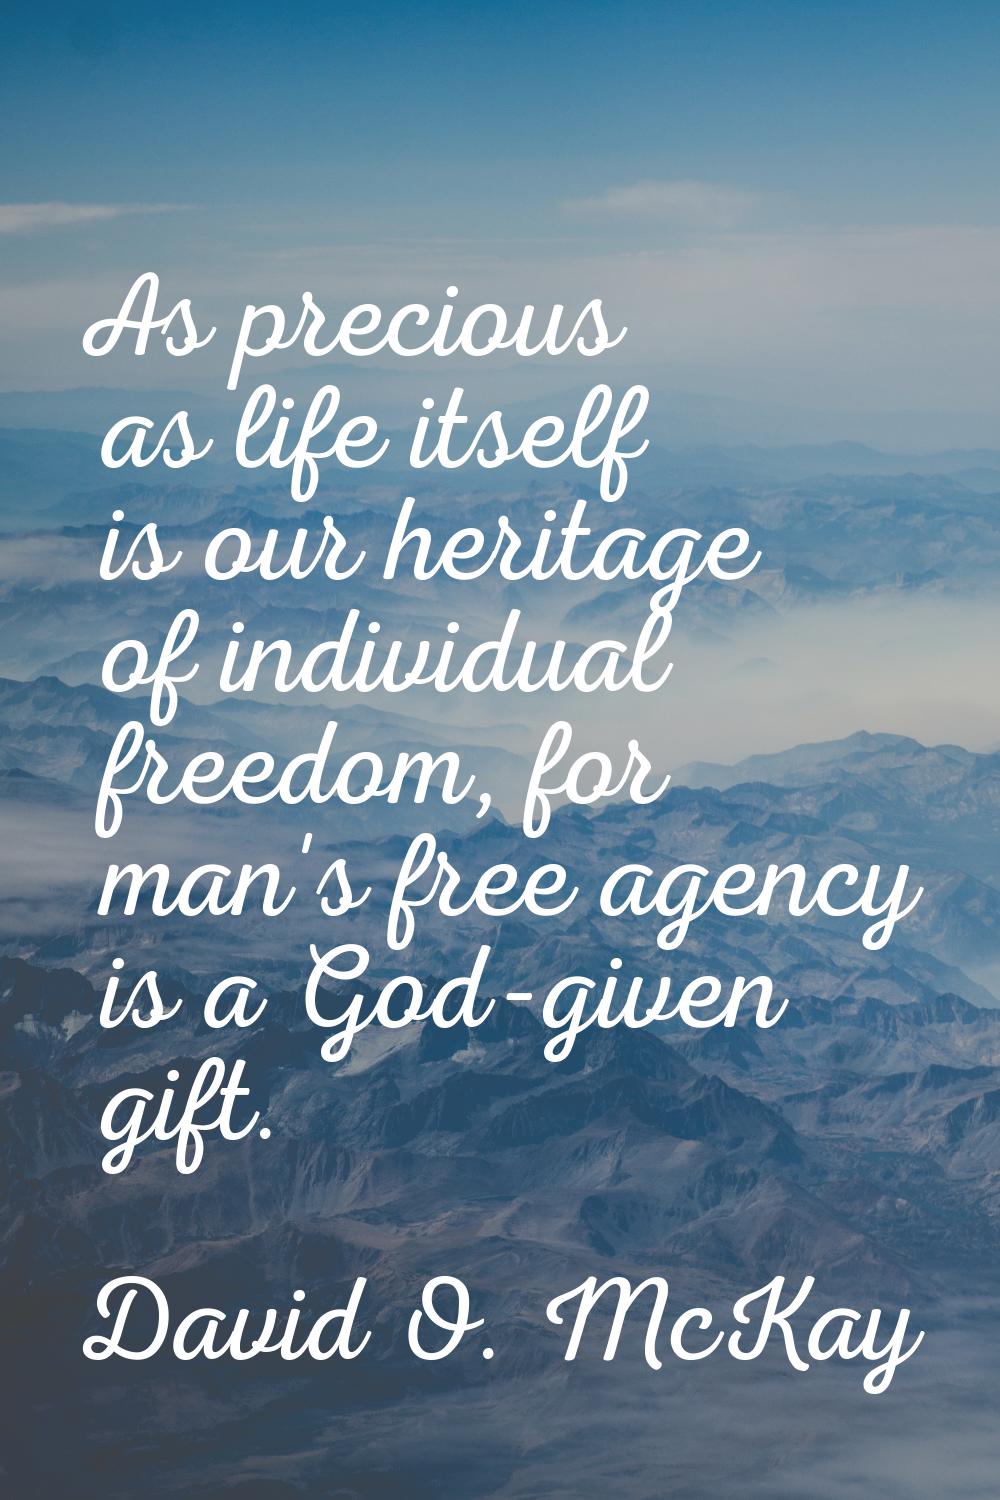 As precious as life itself is our heritage of individual freedom, for man's free agency is a God-gi